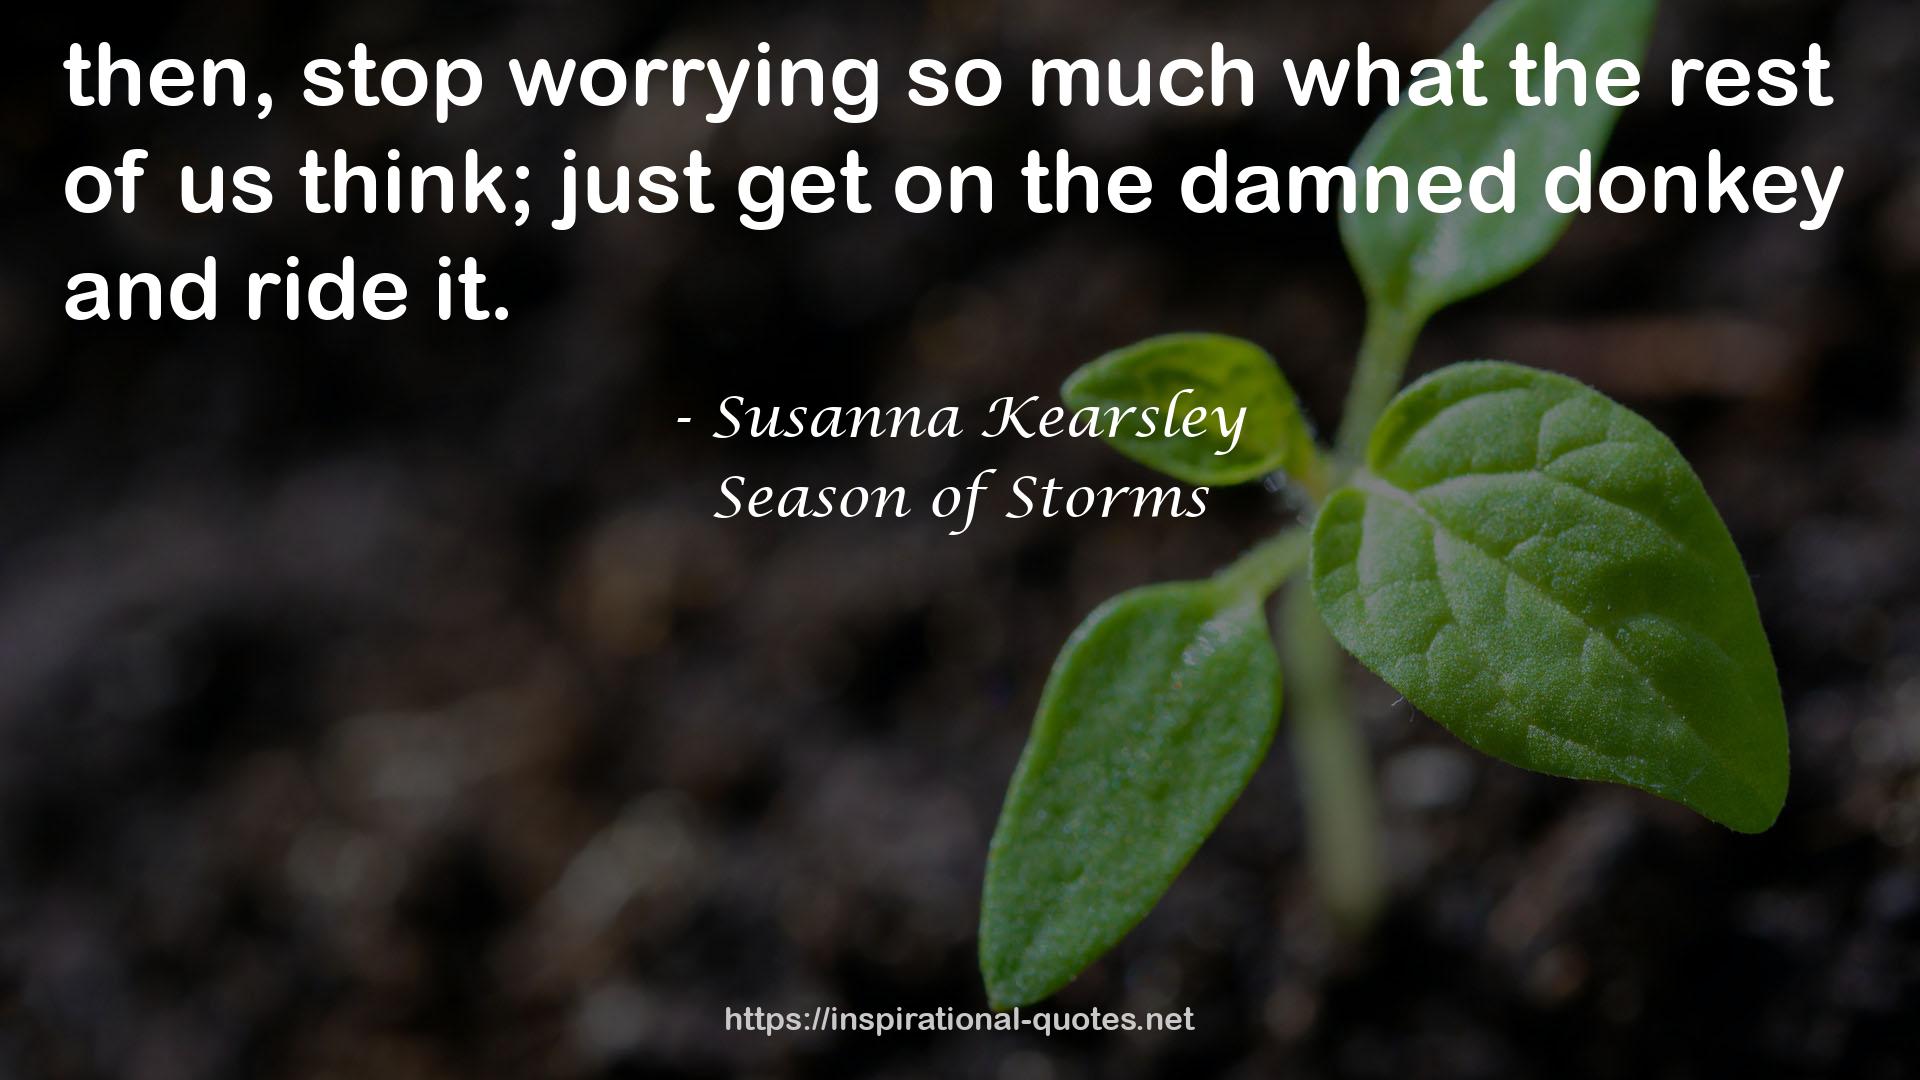 Season of Storms QUOTES